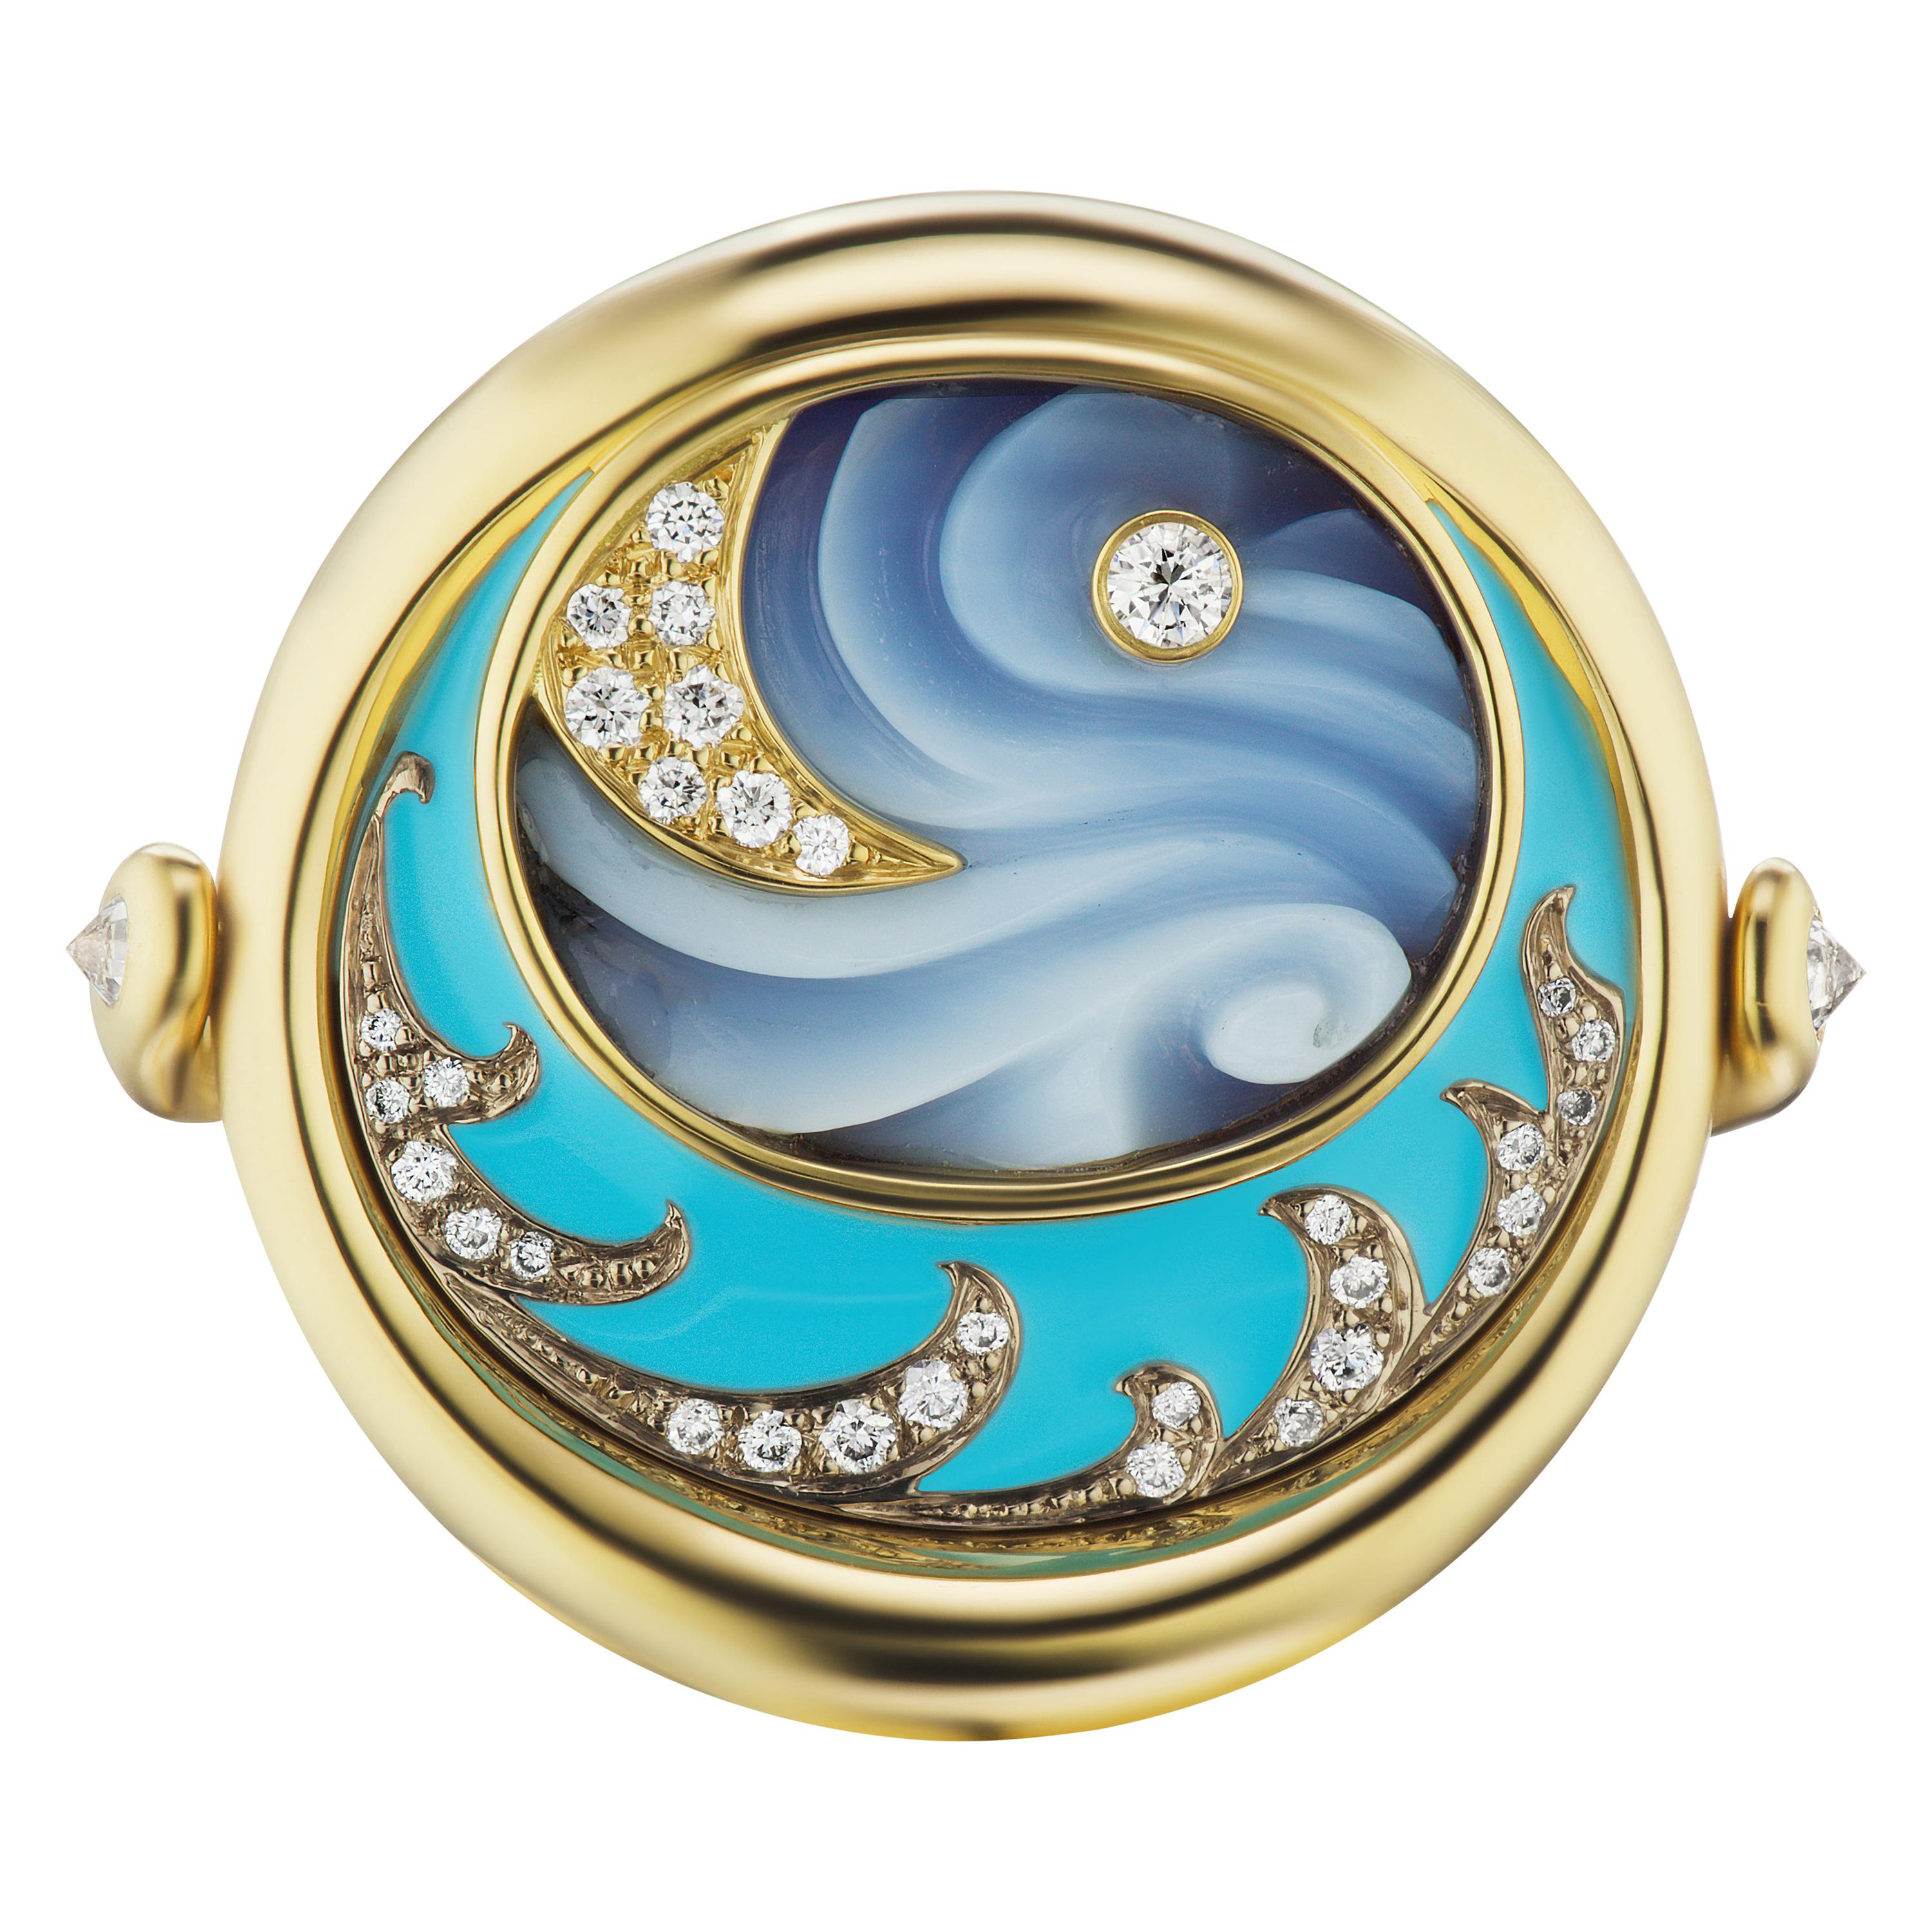 AnaKatarina 4 Elements "Water" Ring in Agate, Diamond, Yellow Gold, and Enamel For Sale